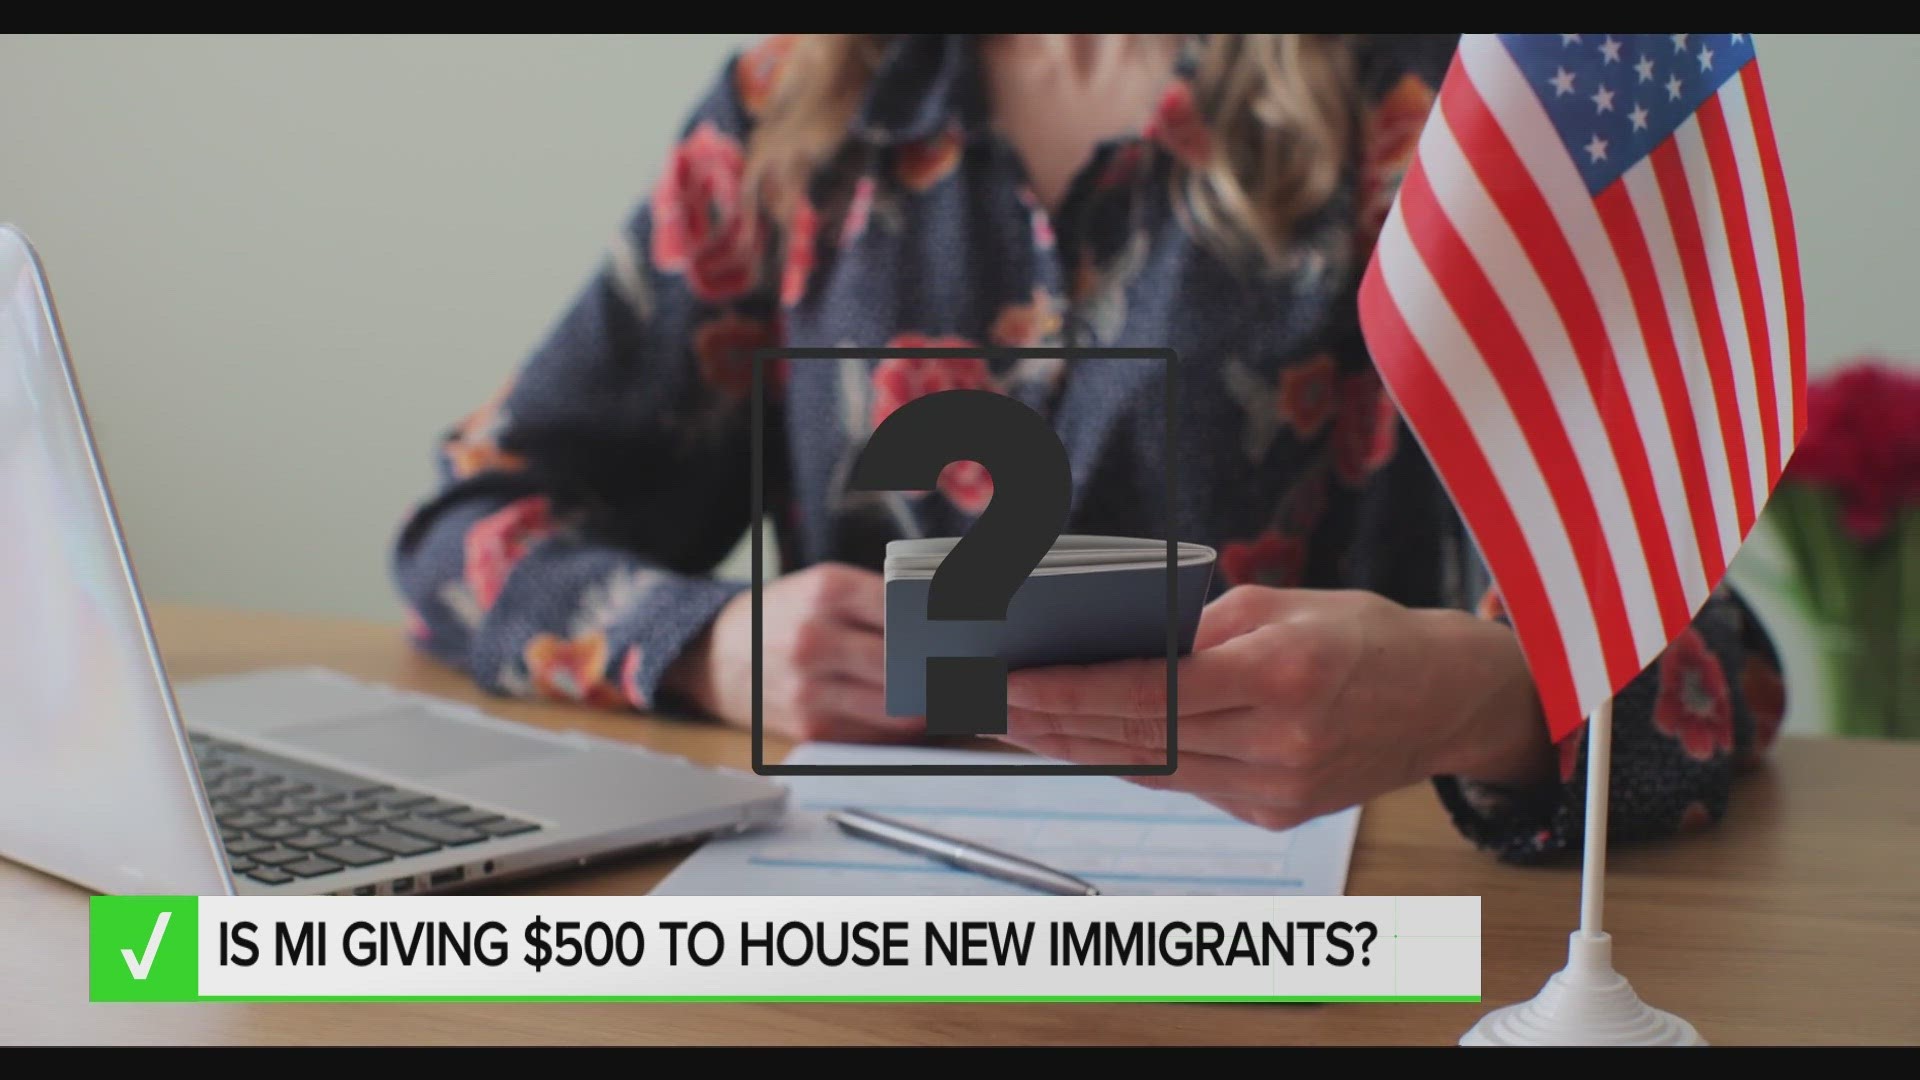 A viewer asked if Michigan was giving money to house new immigrants, Josh Alburtus verifies.